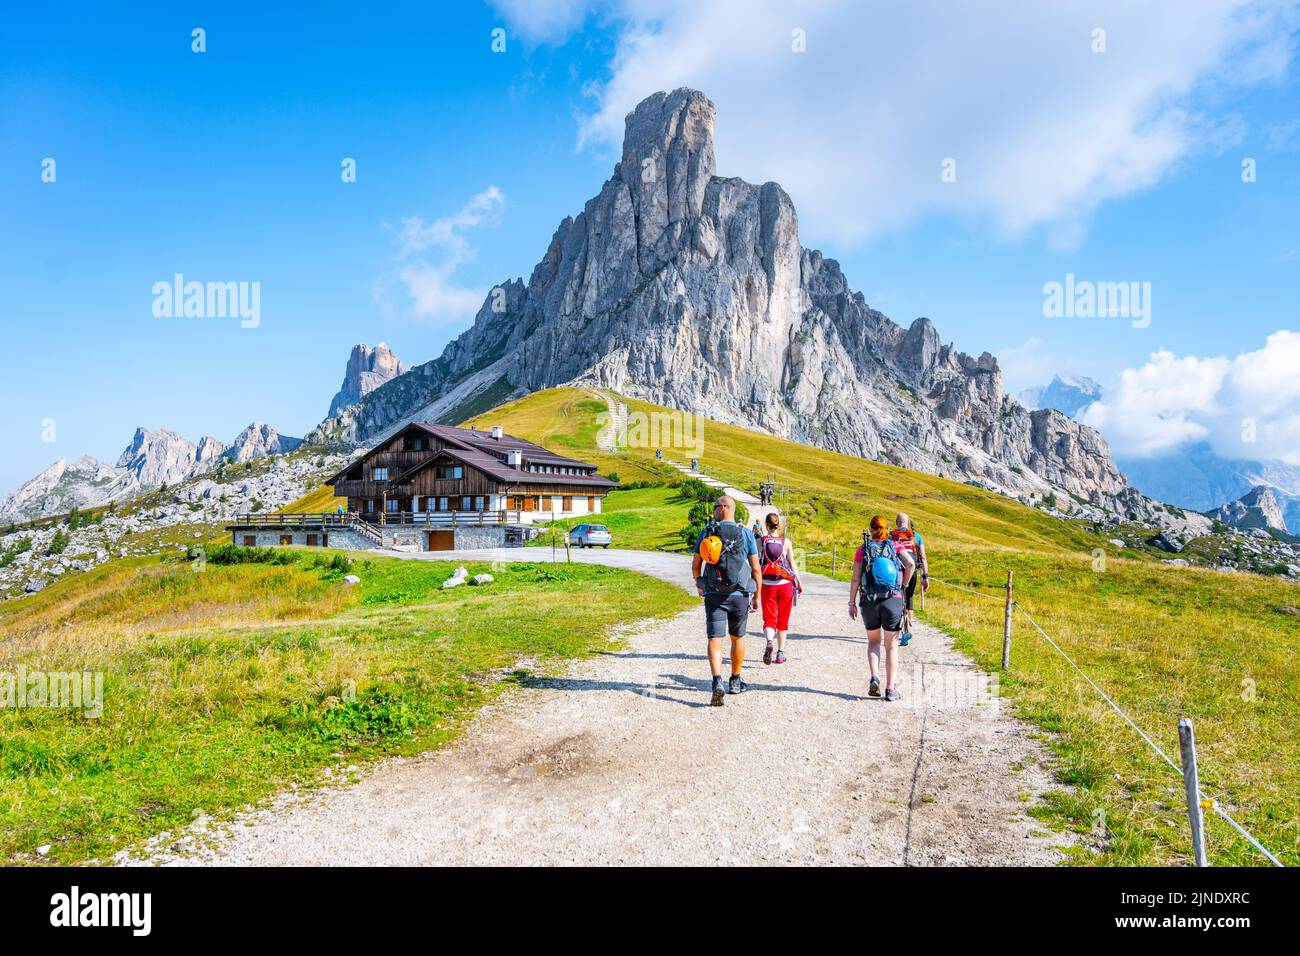 Group of hikers walks towards mountains Stock Photo